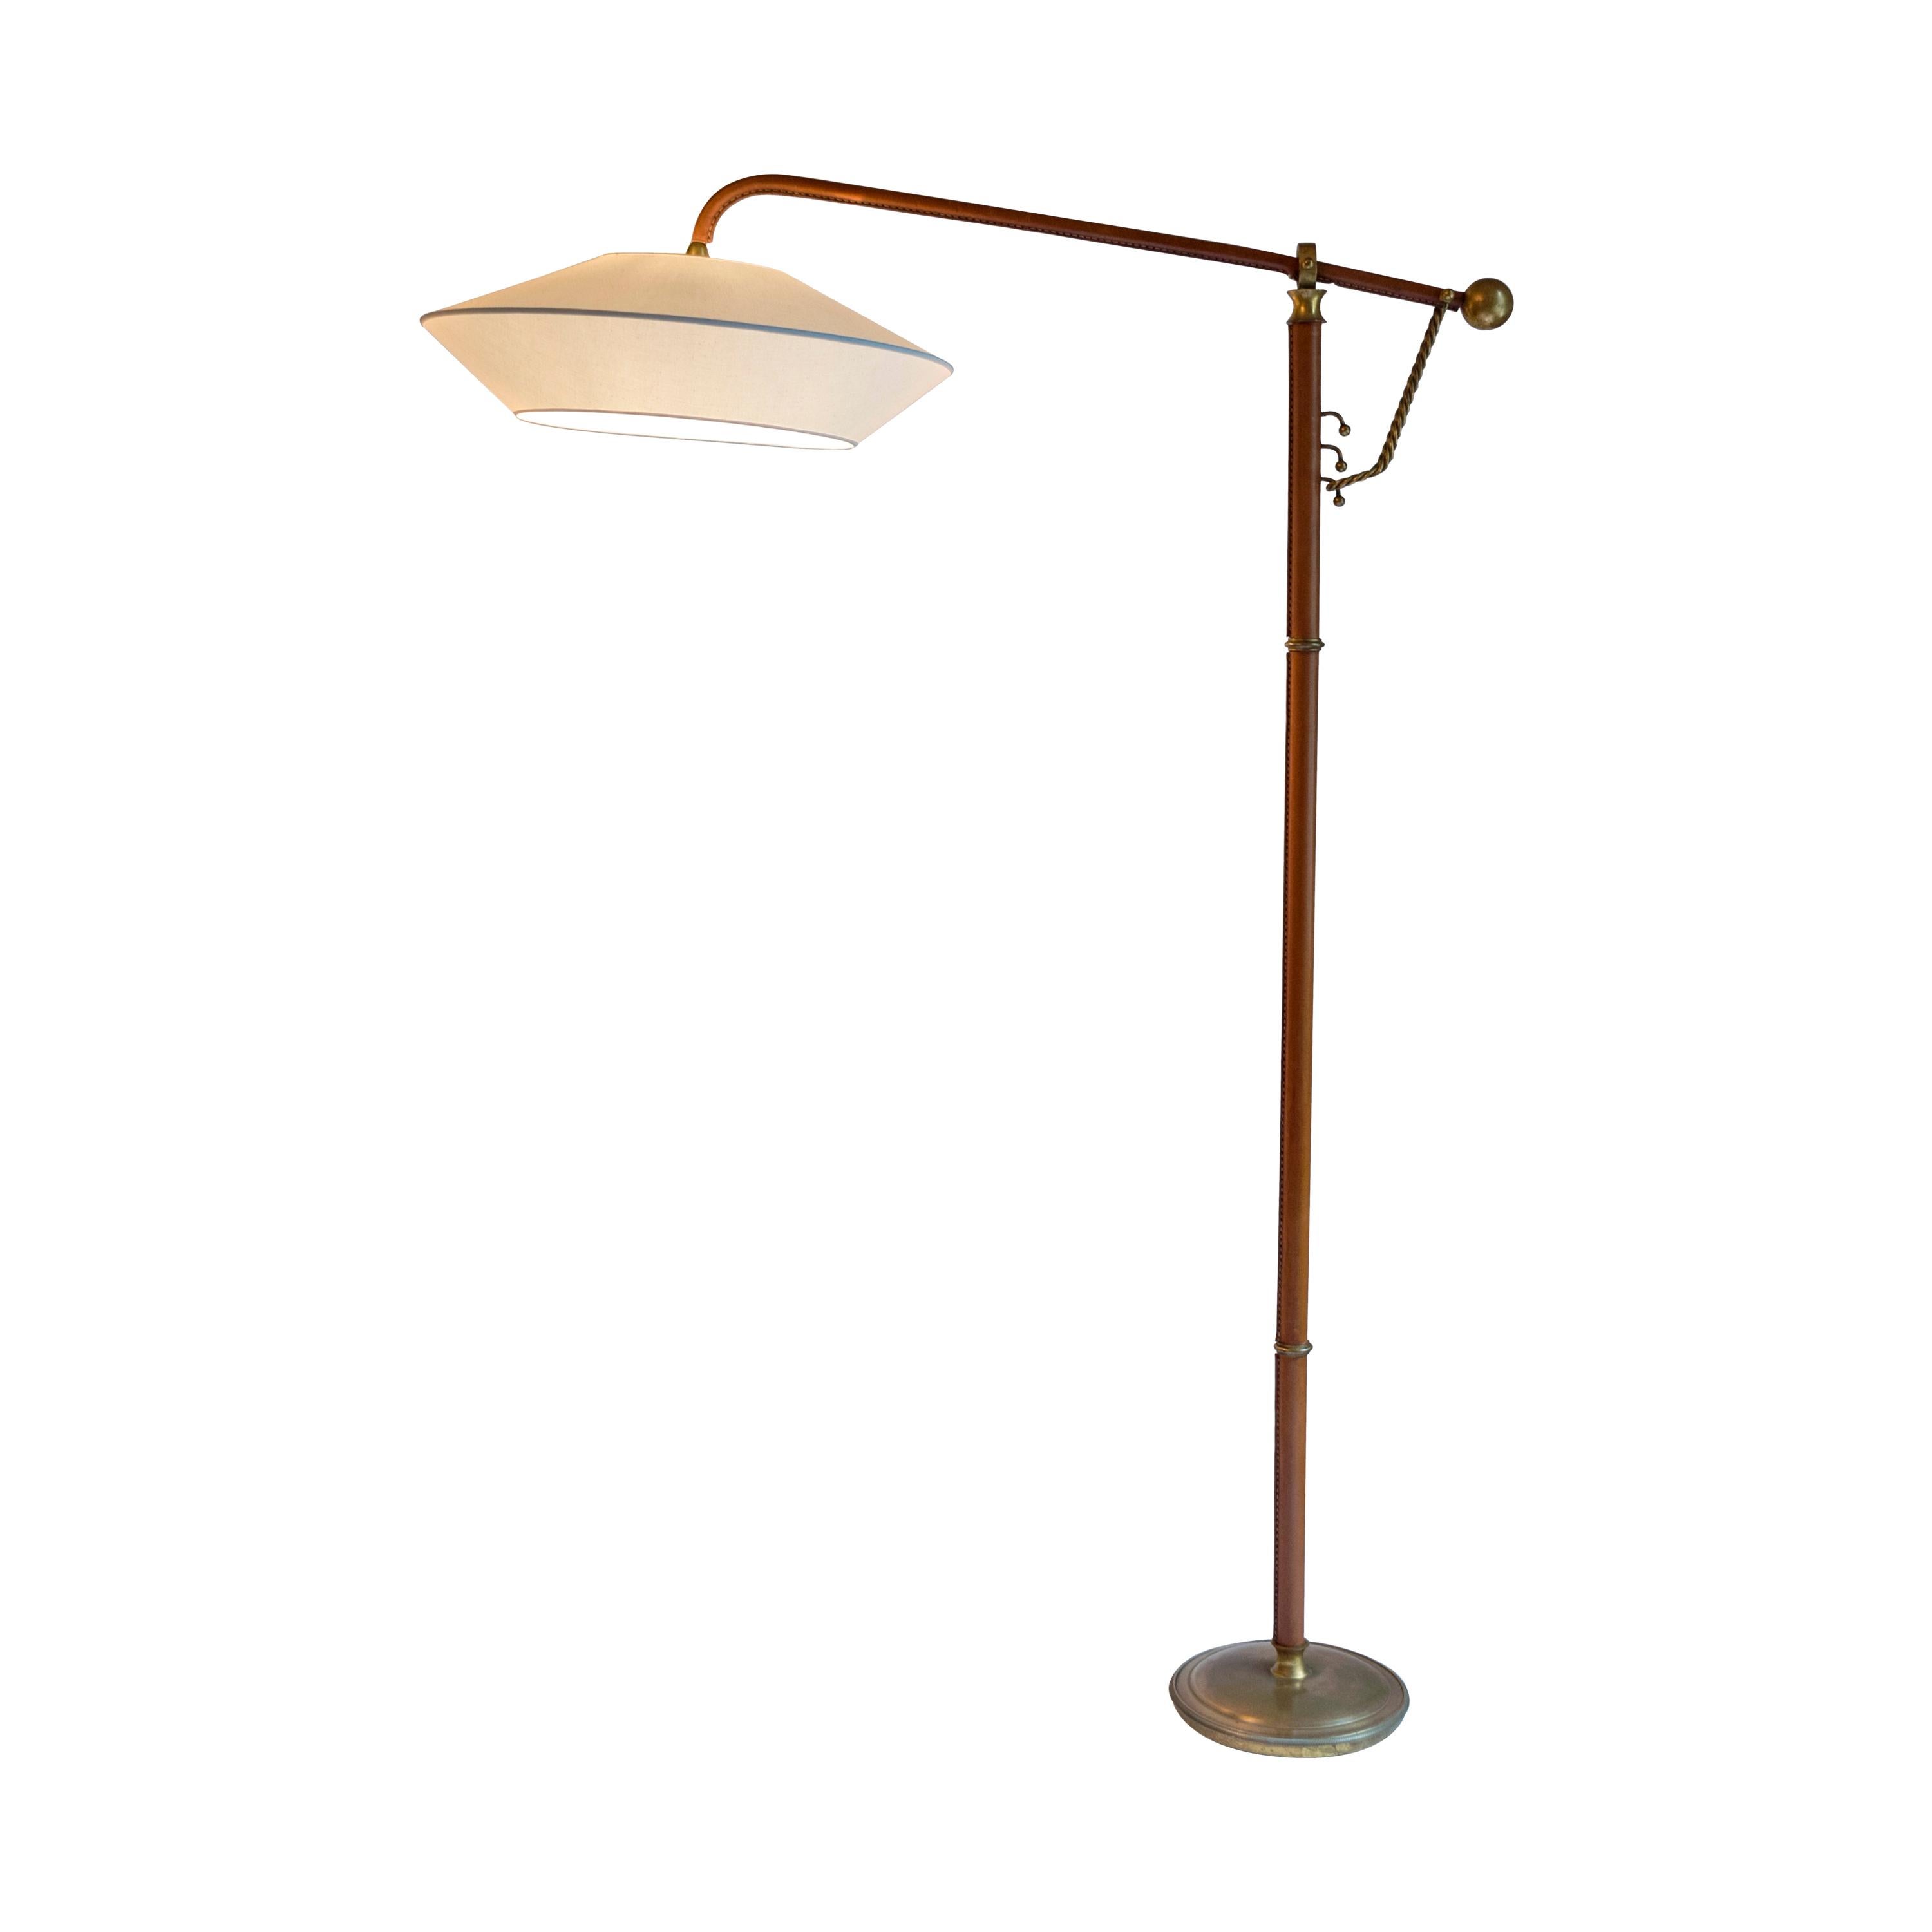 Stitched Leather Floor Lamp by Jacques Adnet